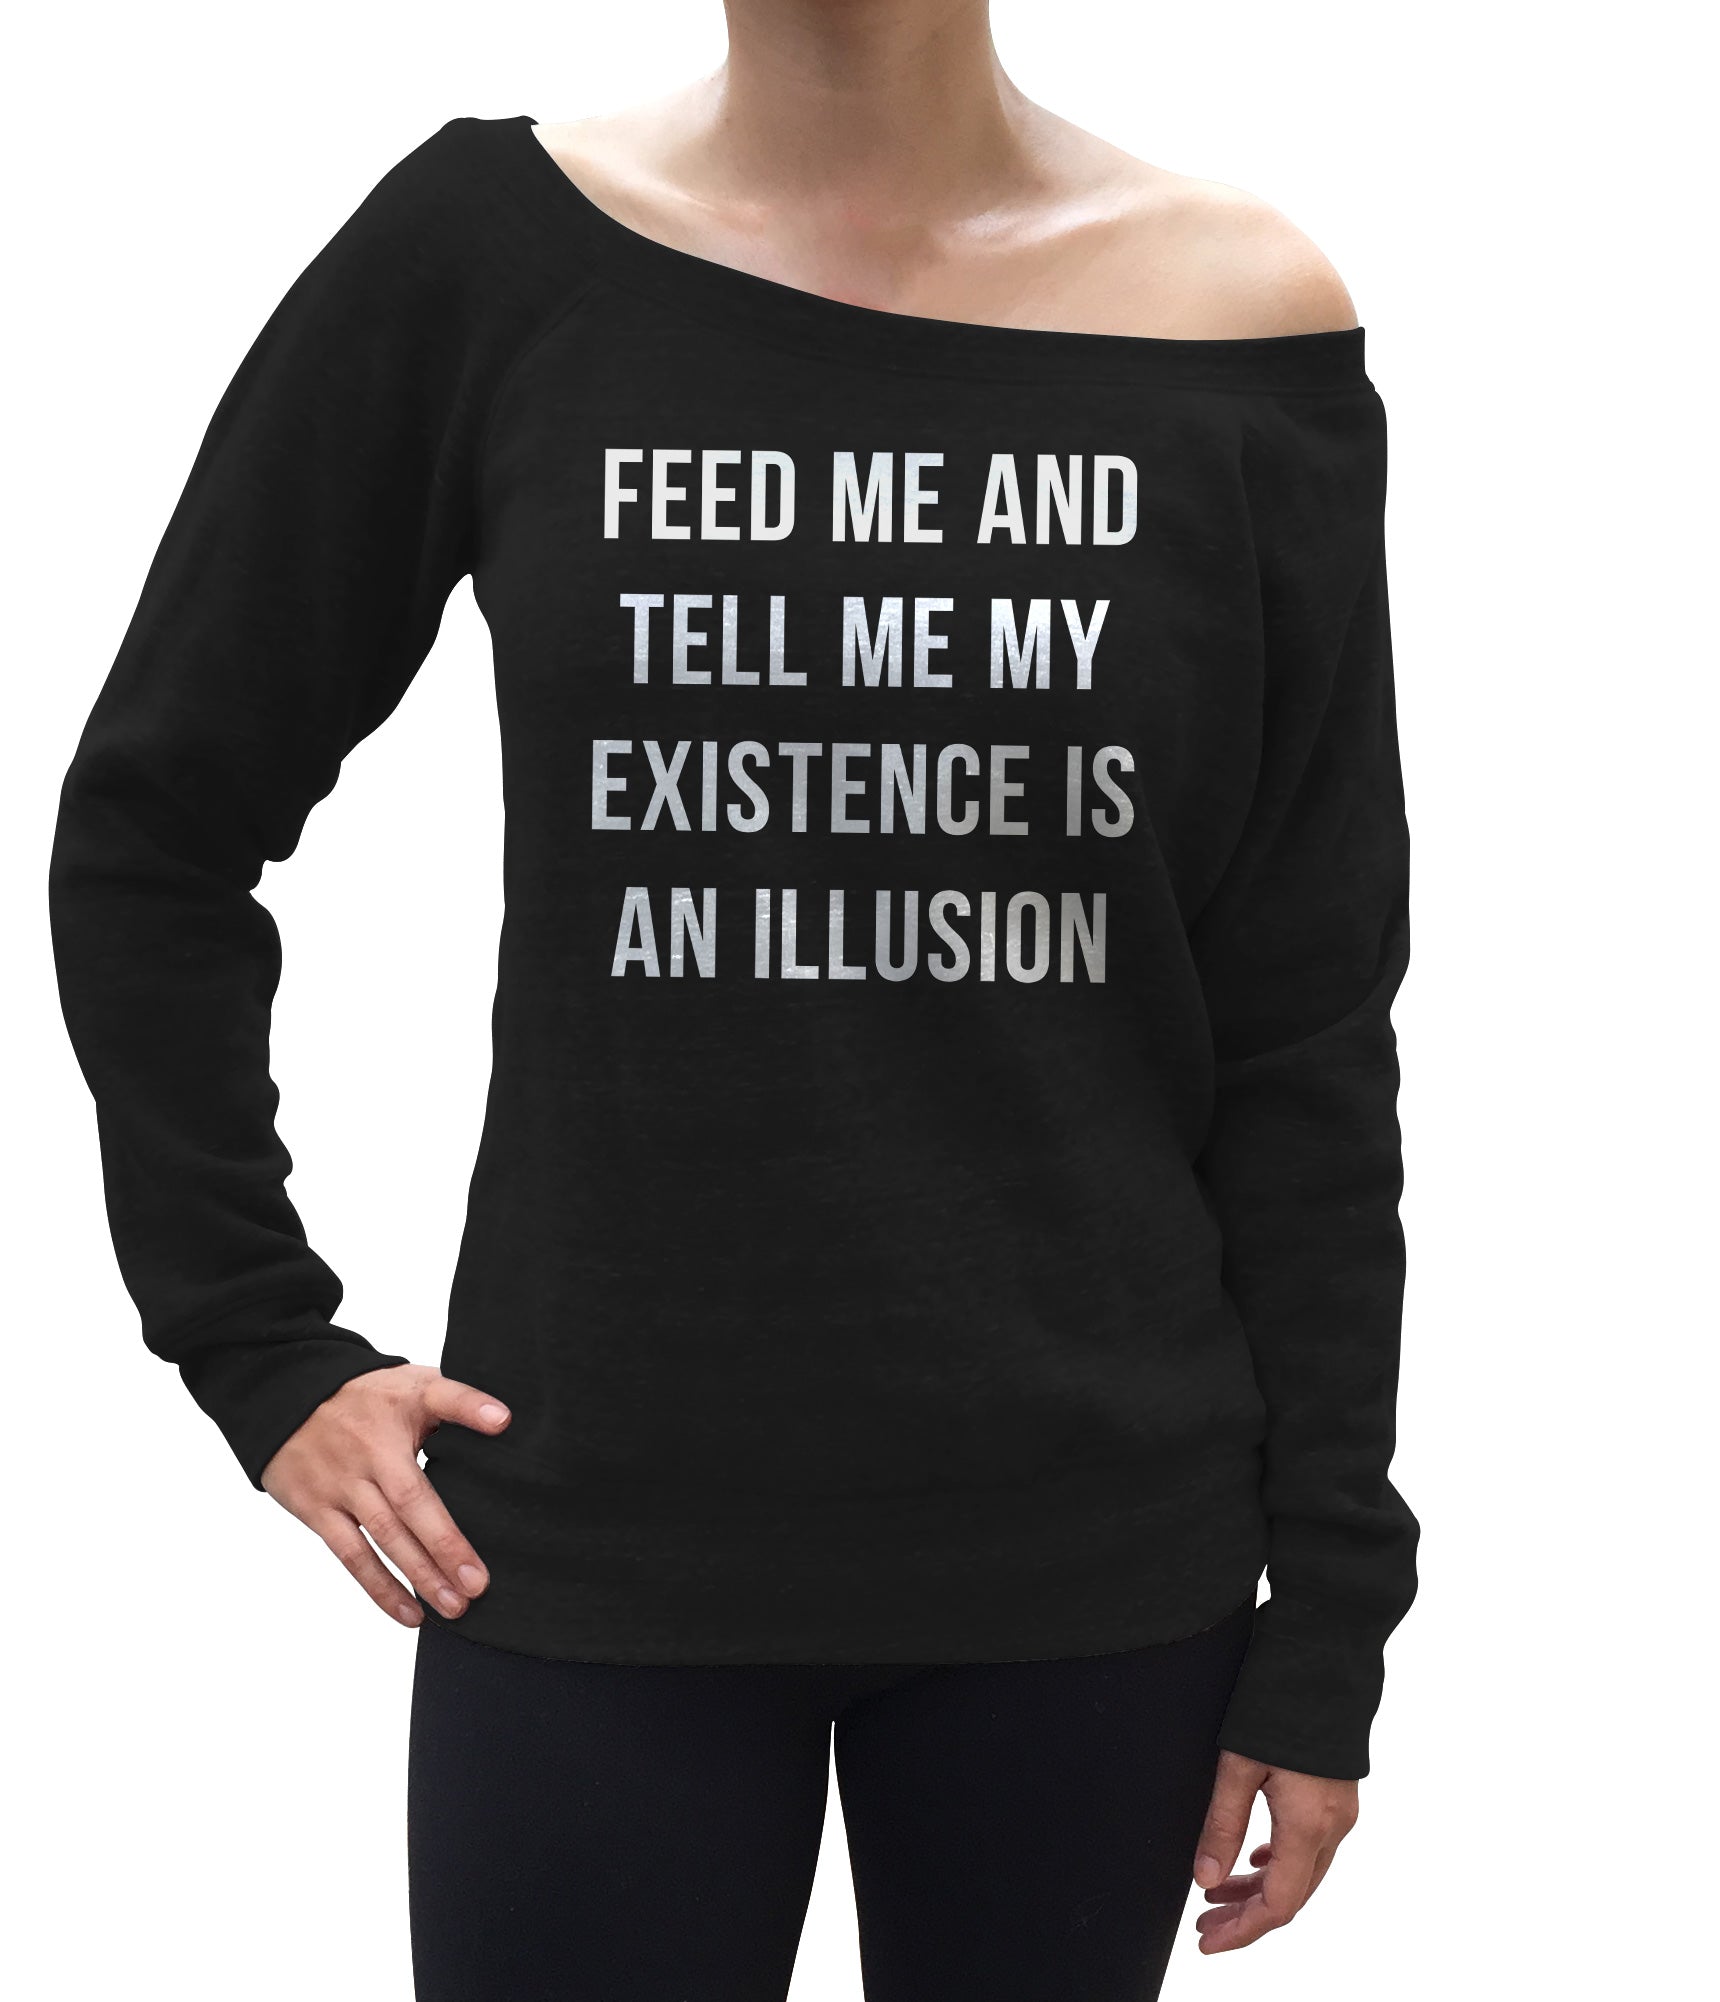 Women's Feed Me and Tell Me My Existence is an Illusion Scoop Neck Fleece - Existentialism Shirt